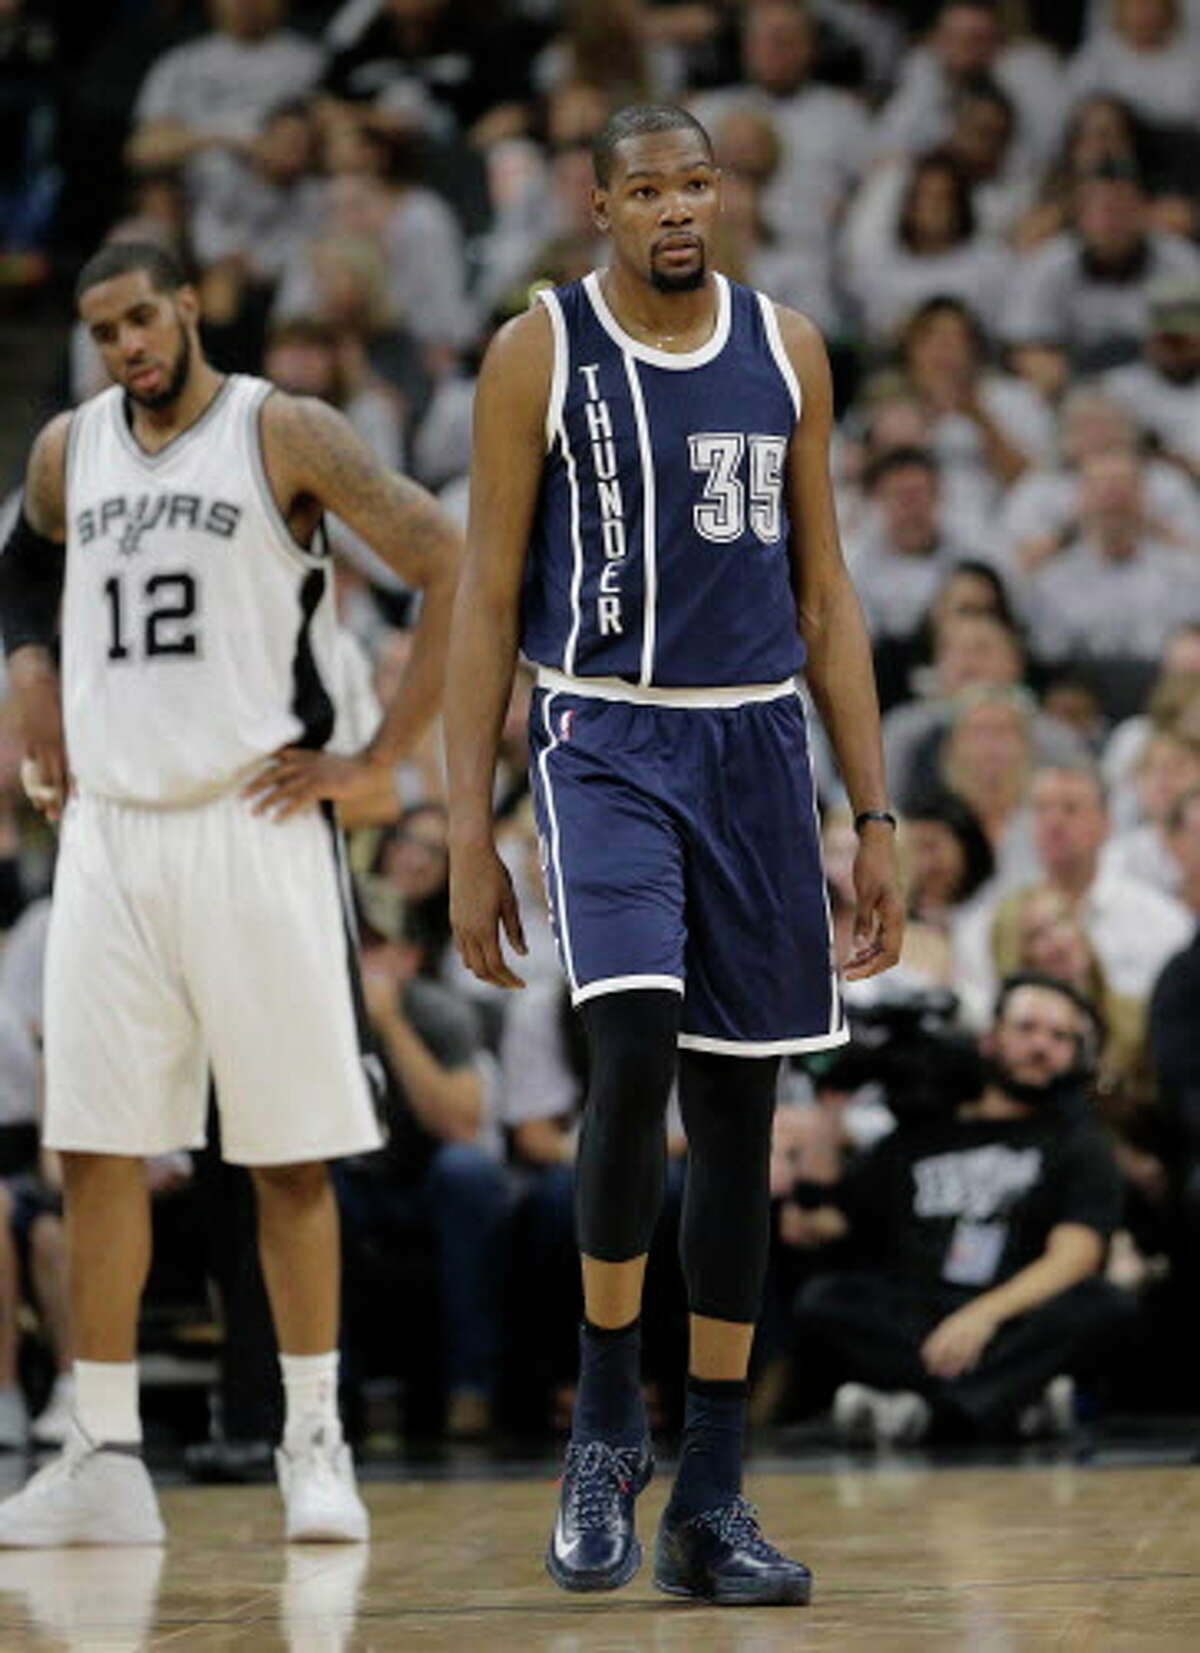 Oklahoma City Thunder forward Kevin Durant (35) walks up court during the first half in Game 1 of a second-round NBA basketball playoff series as San Antonio Spurs forward LaMarcus Aldridge (12) looks on, Saturday, April 30, 2016, in San Antonio. (AP Photo/Eric Gay) Spurs vs. Thunder NBA playoffs Game 1.